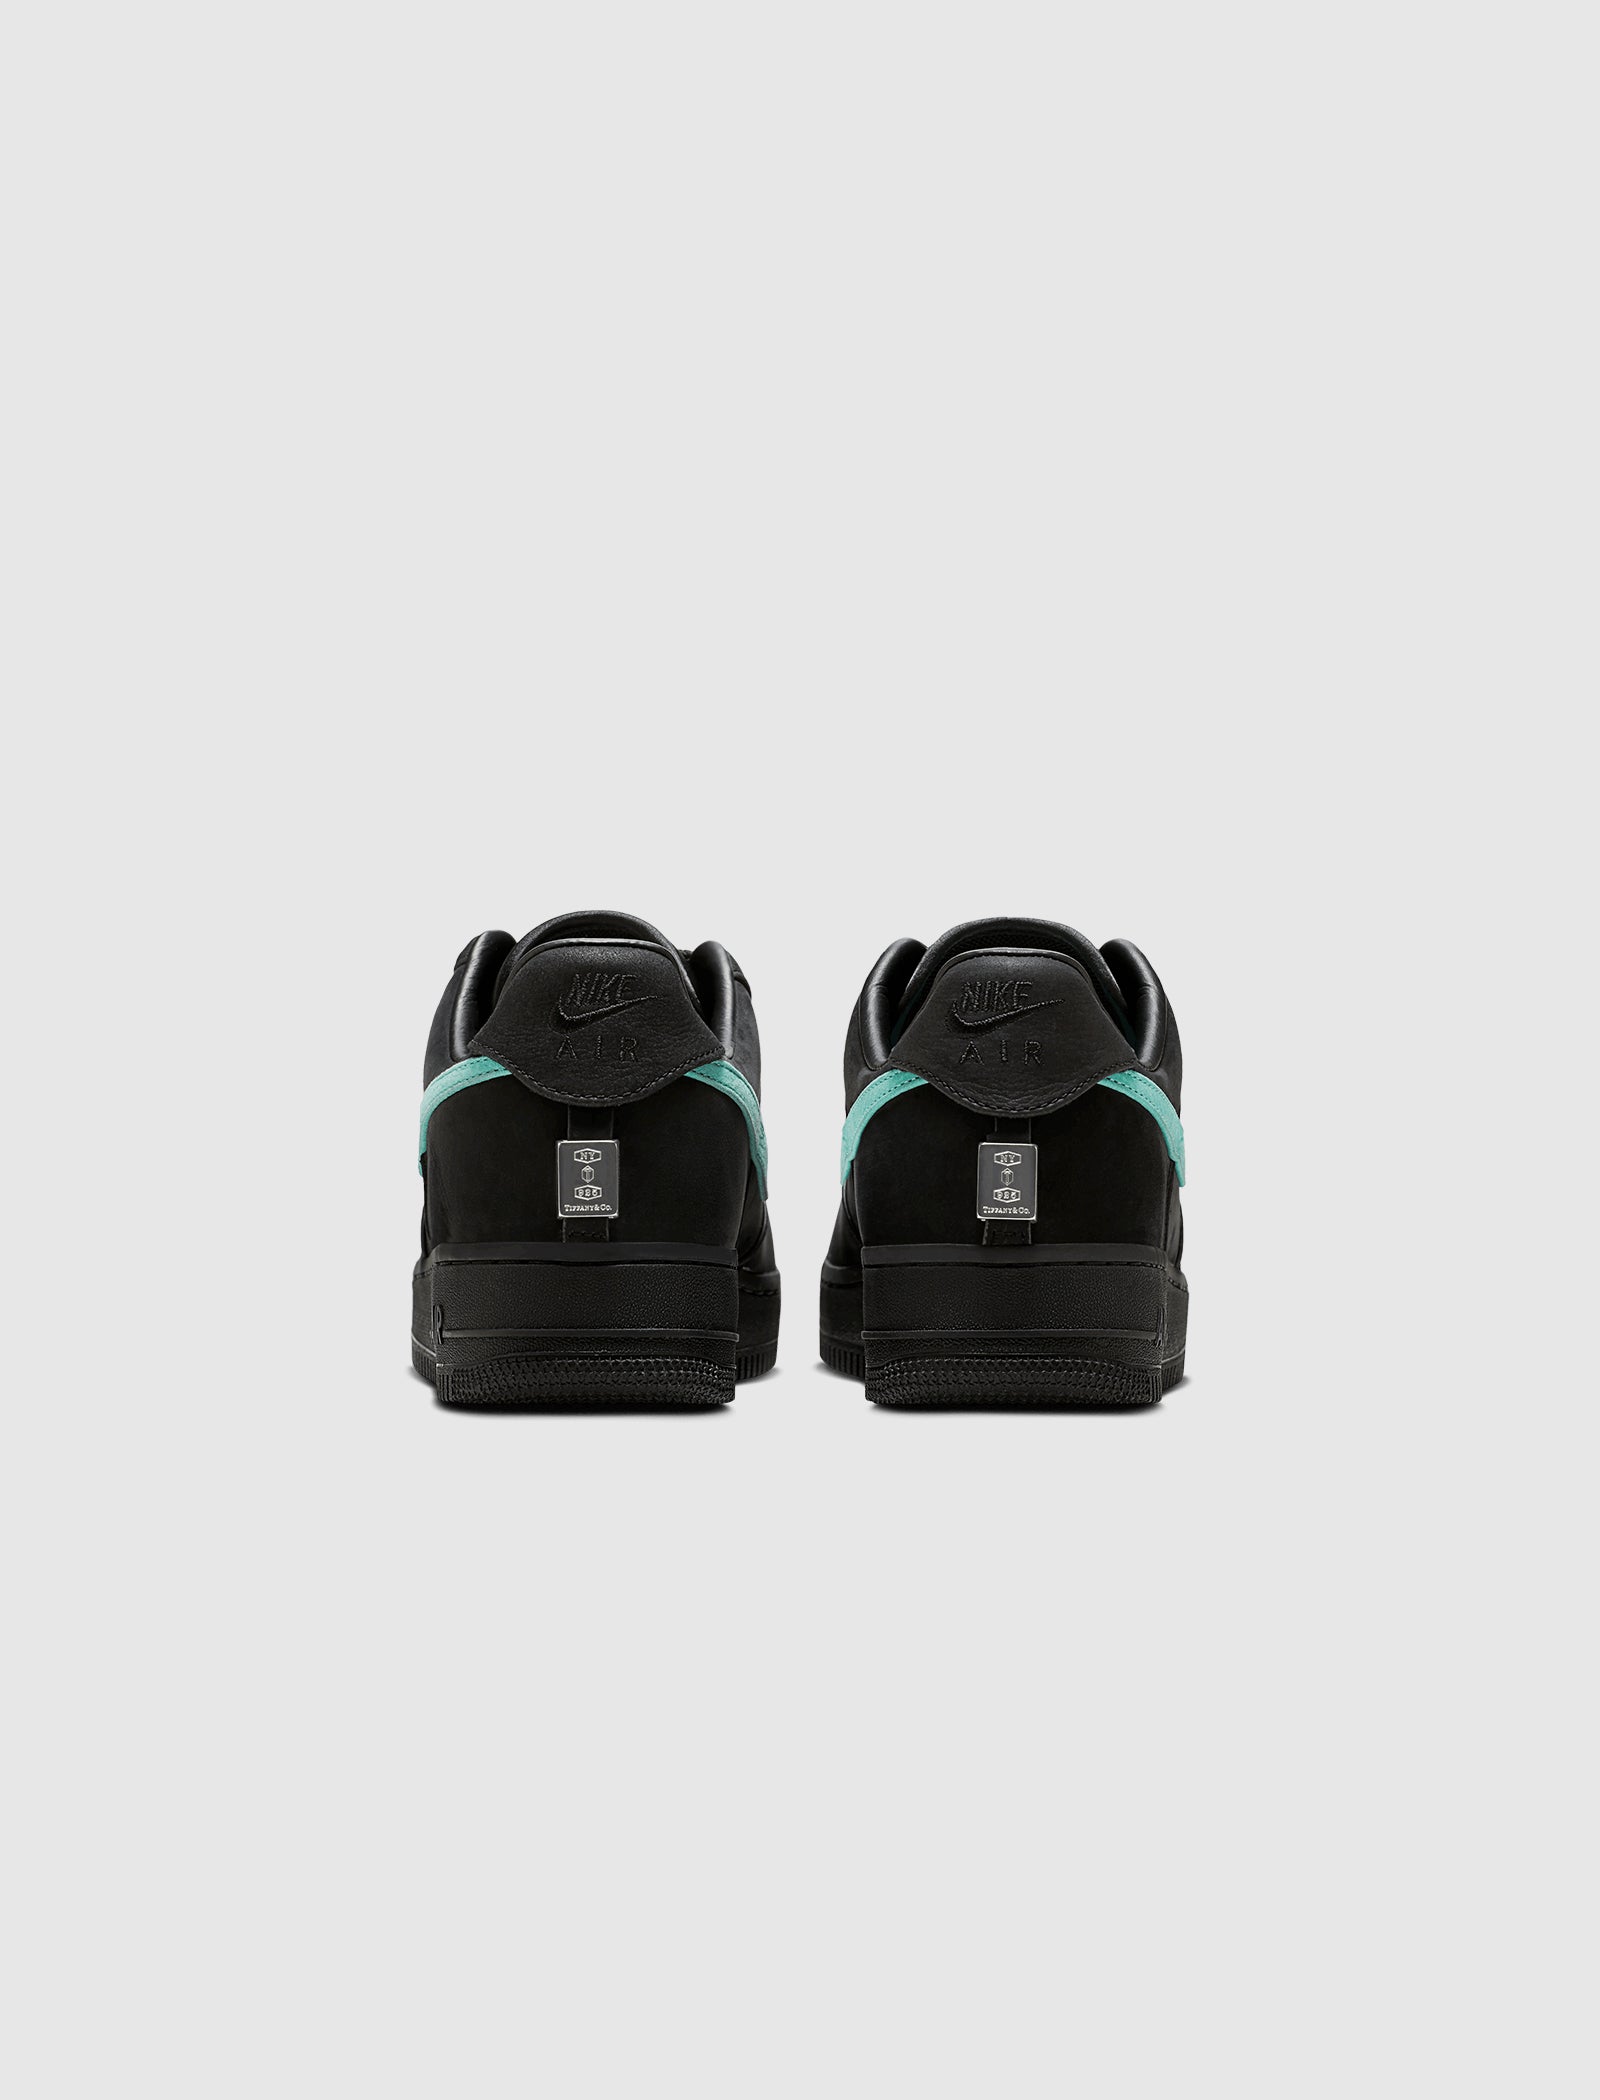 TIFFANY & CO. AIR FORCE 1 LOW 1837